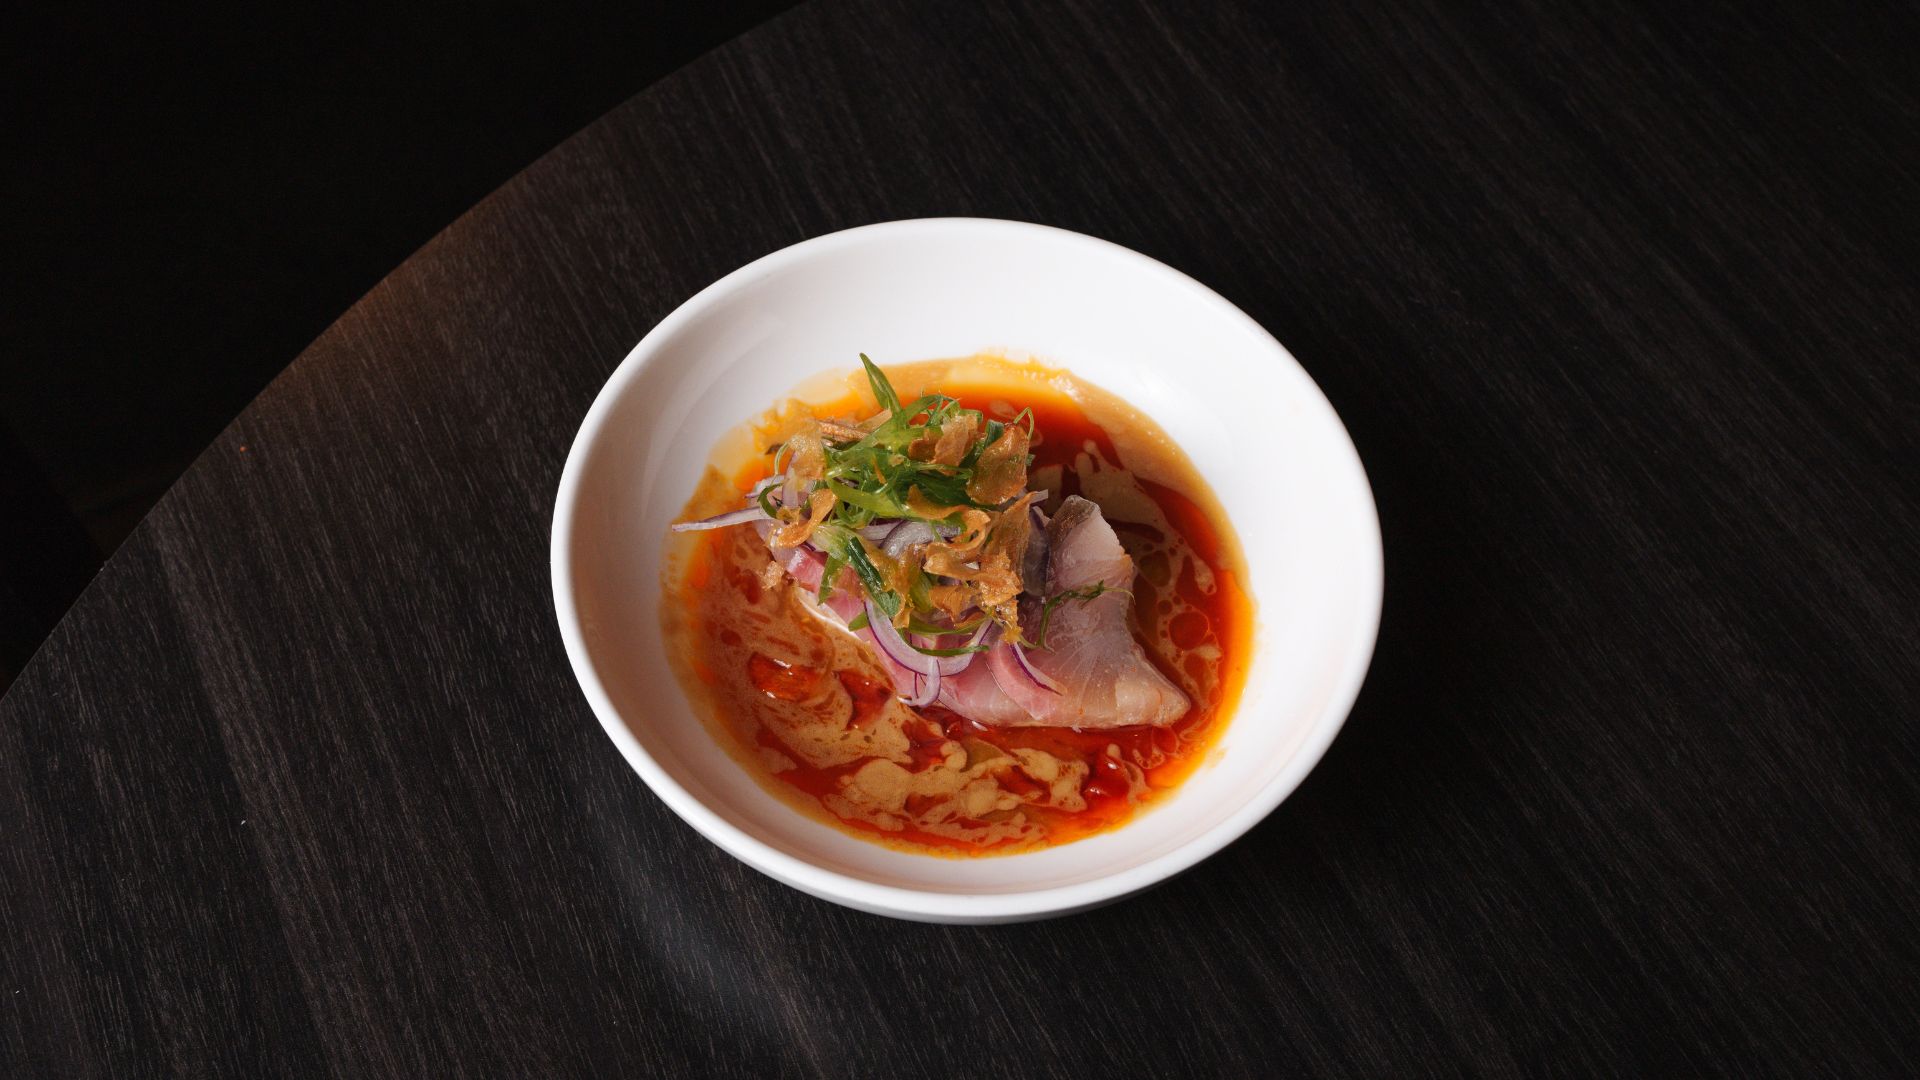 At Indo, chef Nick Bognar pairs fatty yellowtail with coconut nam pla (fish sauce), Thai kosho (a play on traditional yuzu kosho), candied garlic and housemade chile oil.